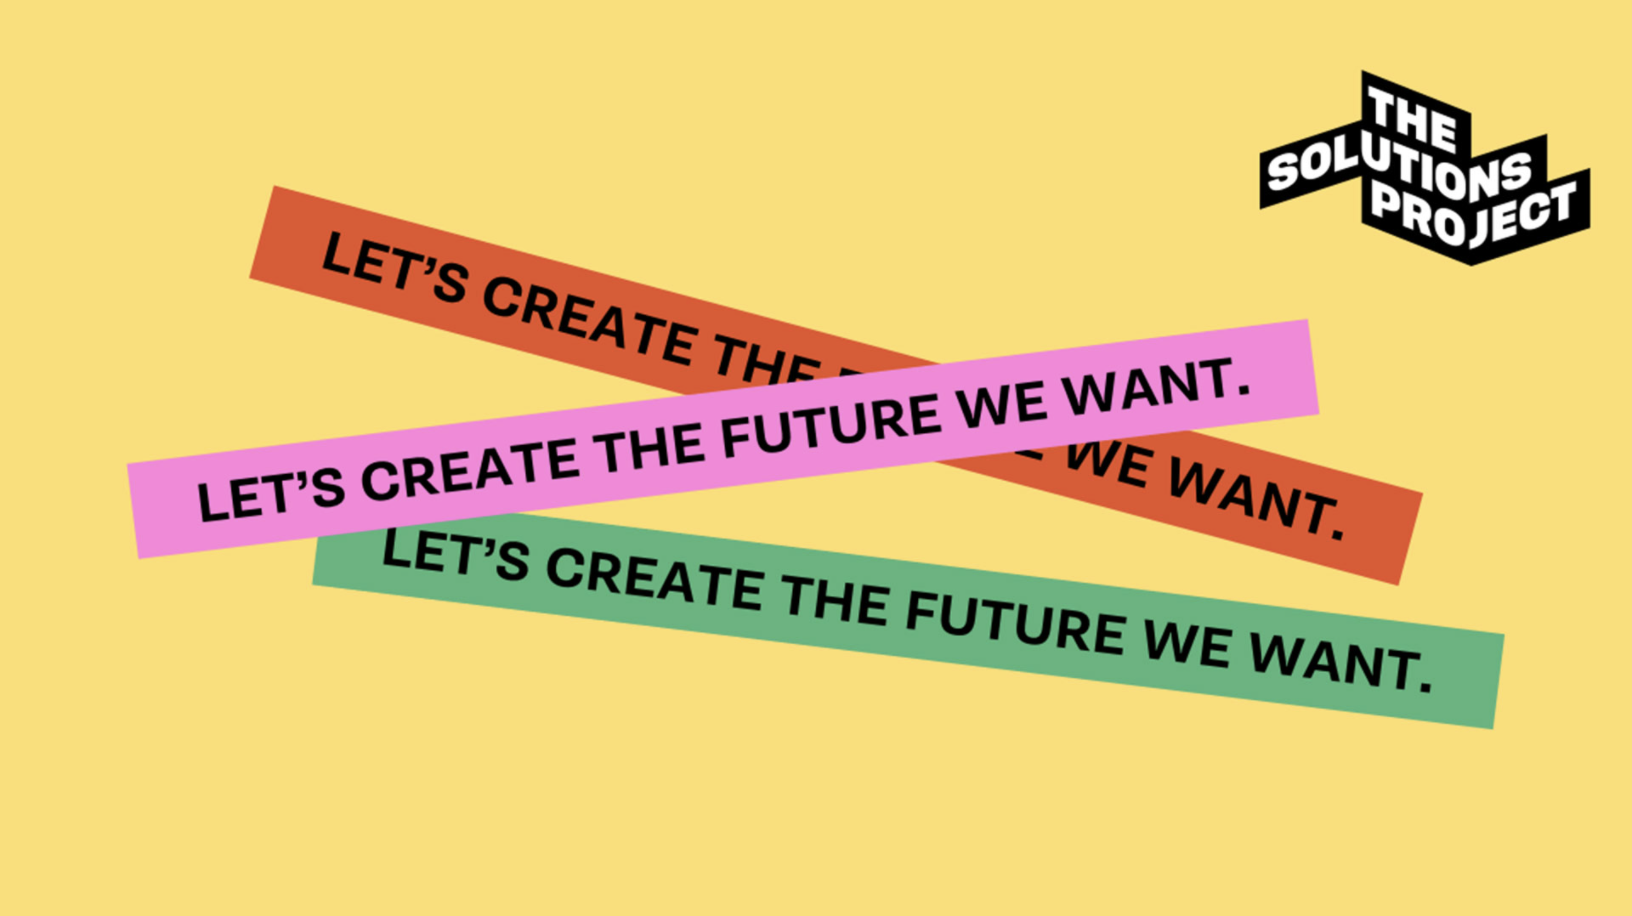 The Solotions Project logo and text saying Let's Create the Future We Want